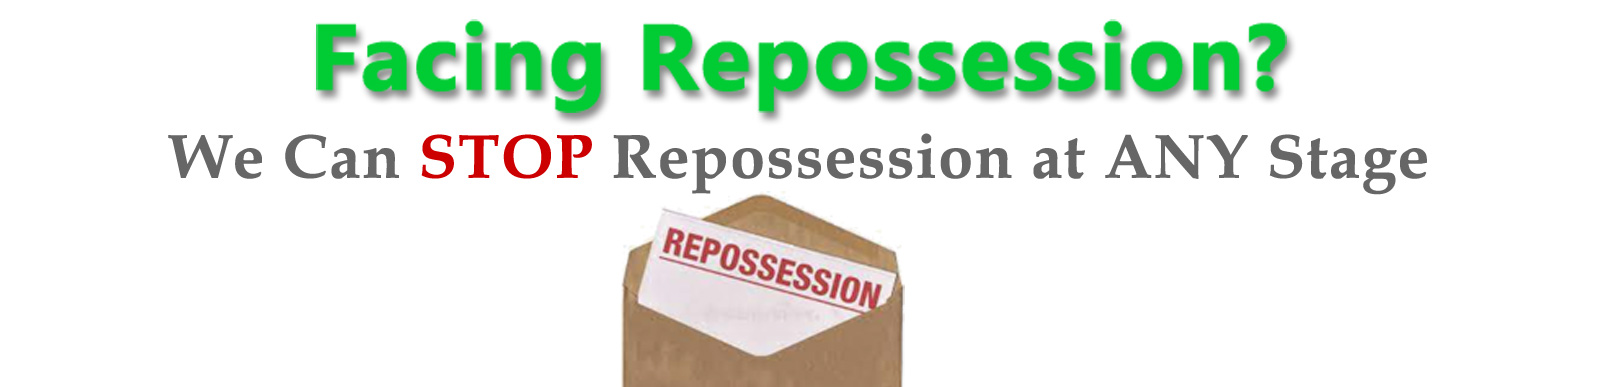 We can stop repossession